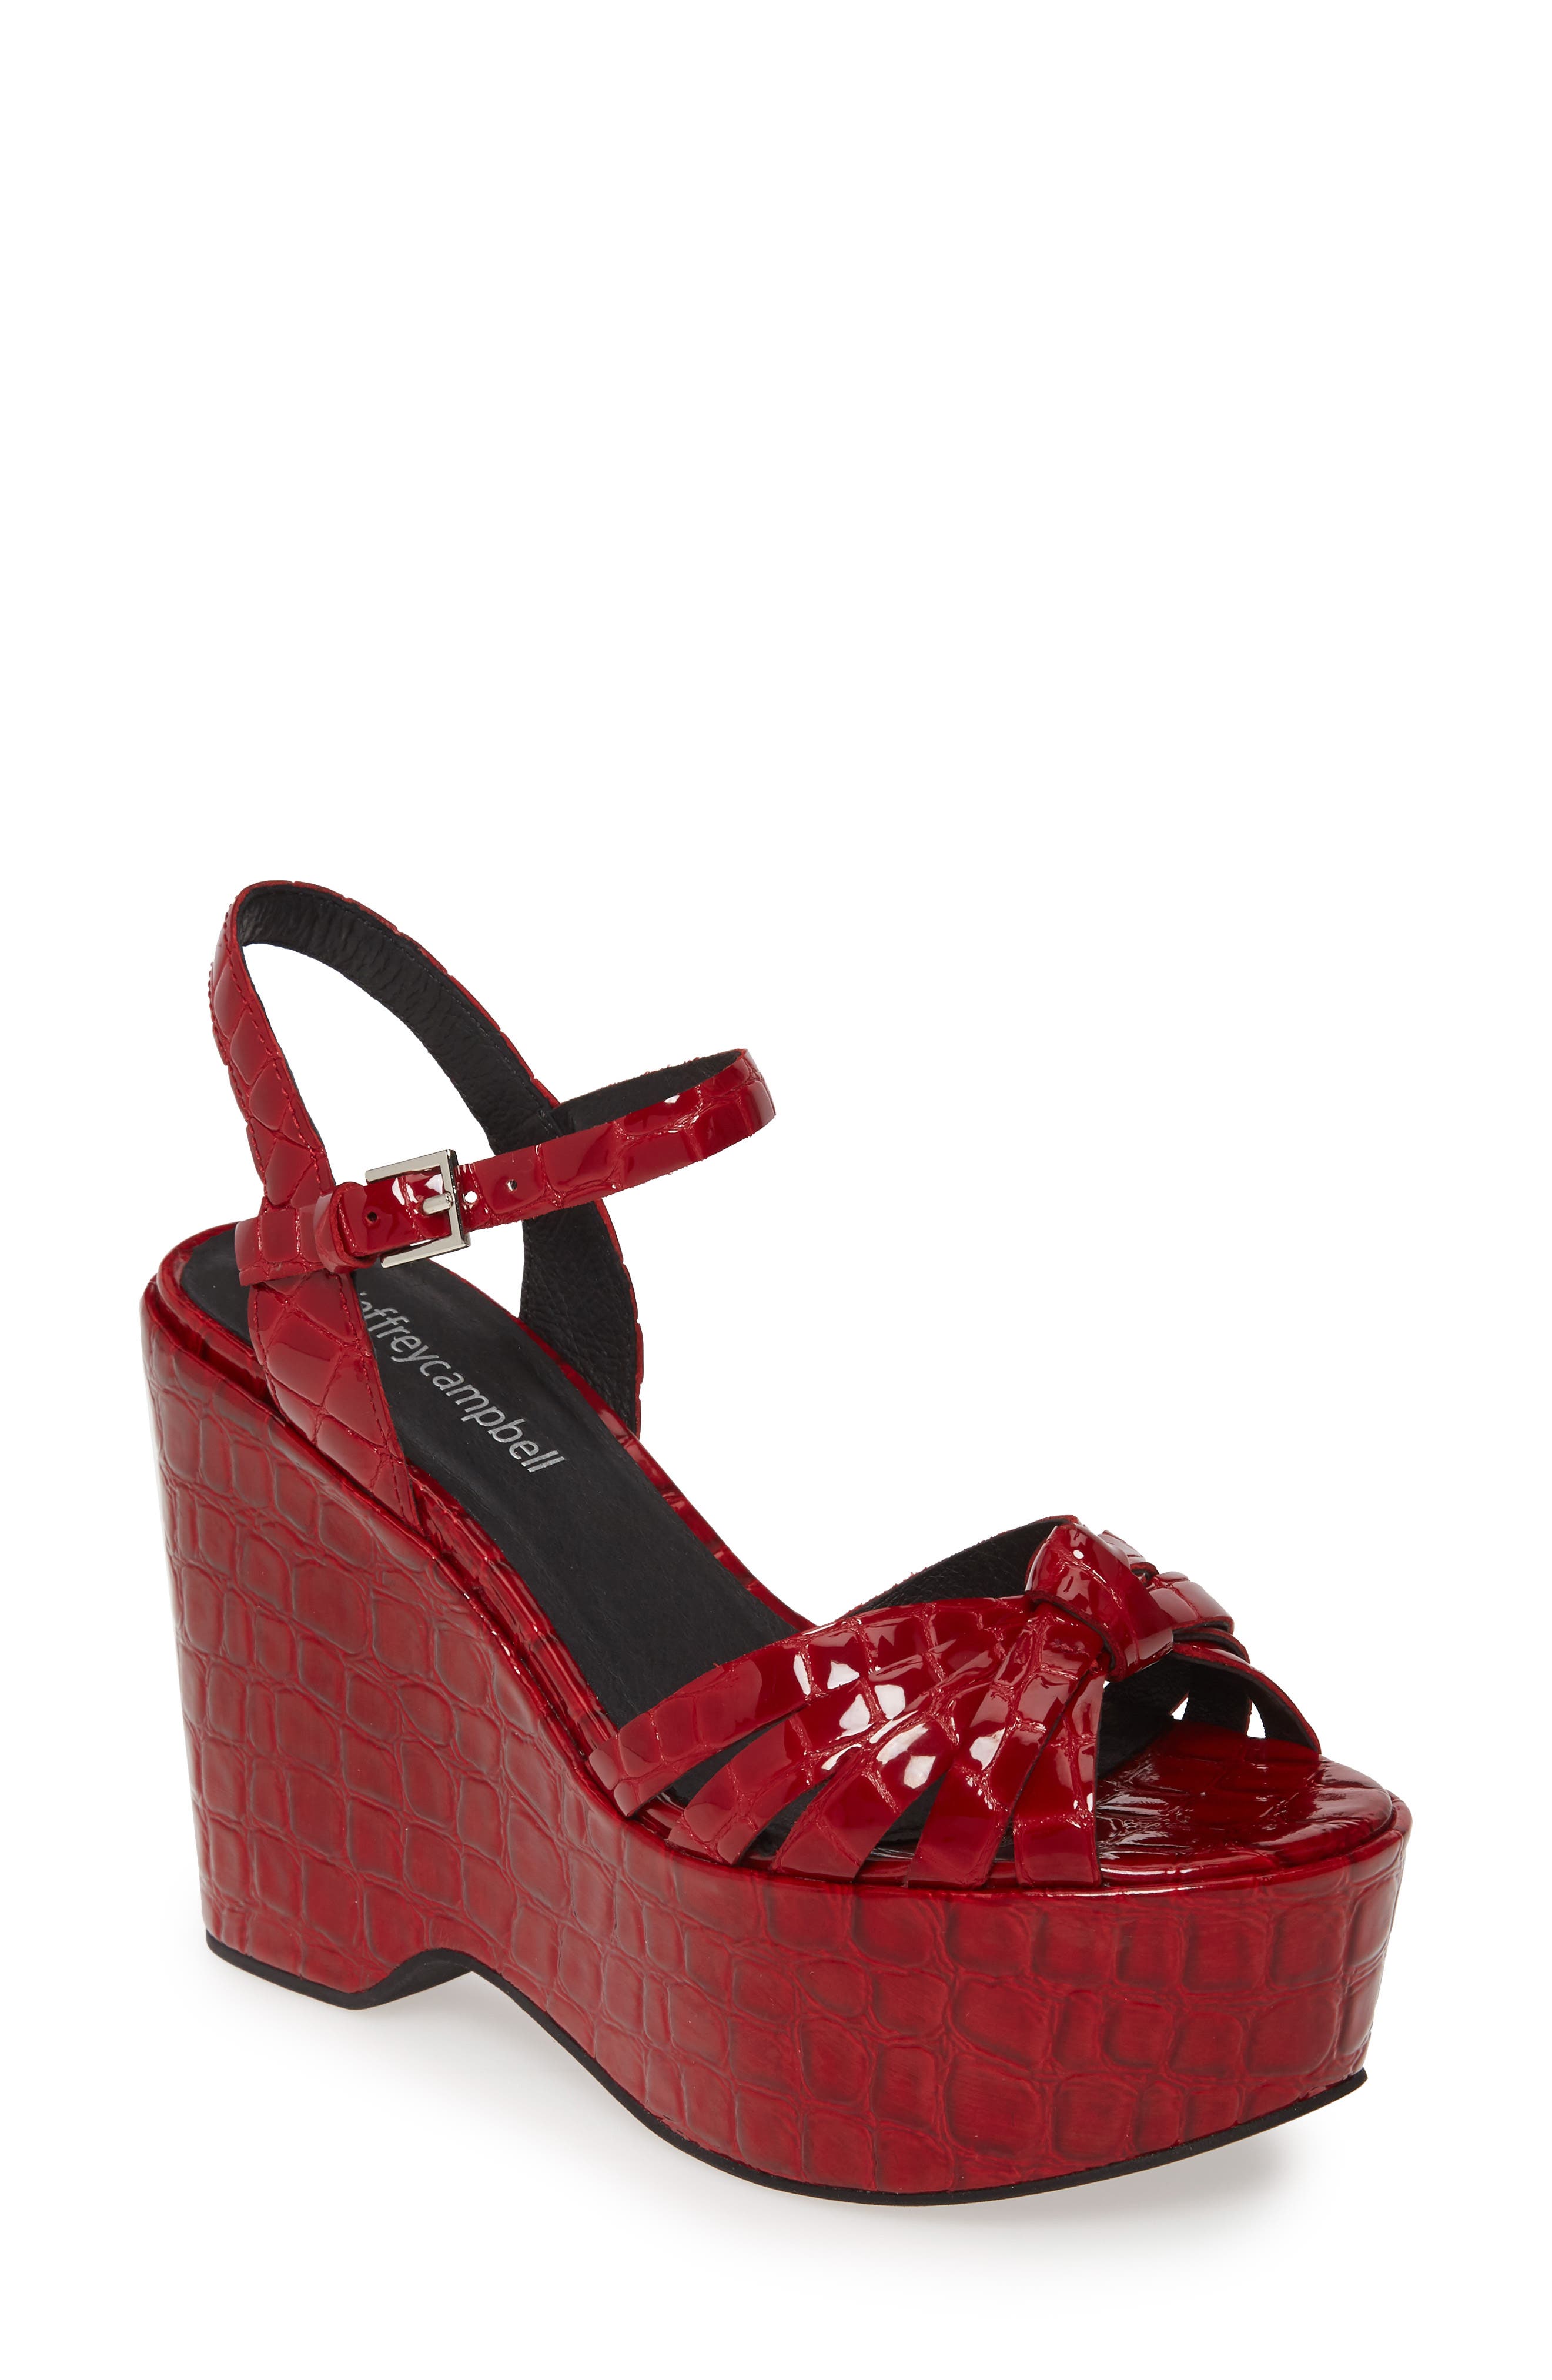 red croc wedges